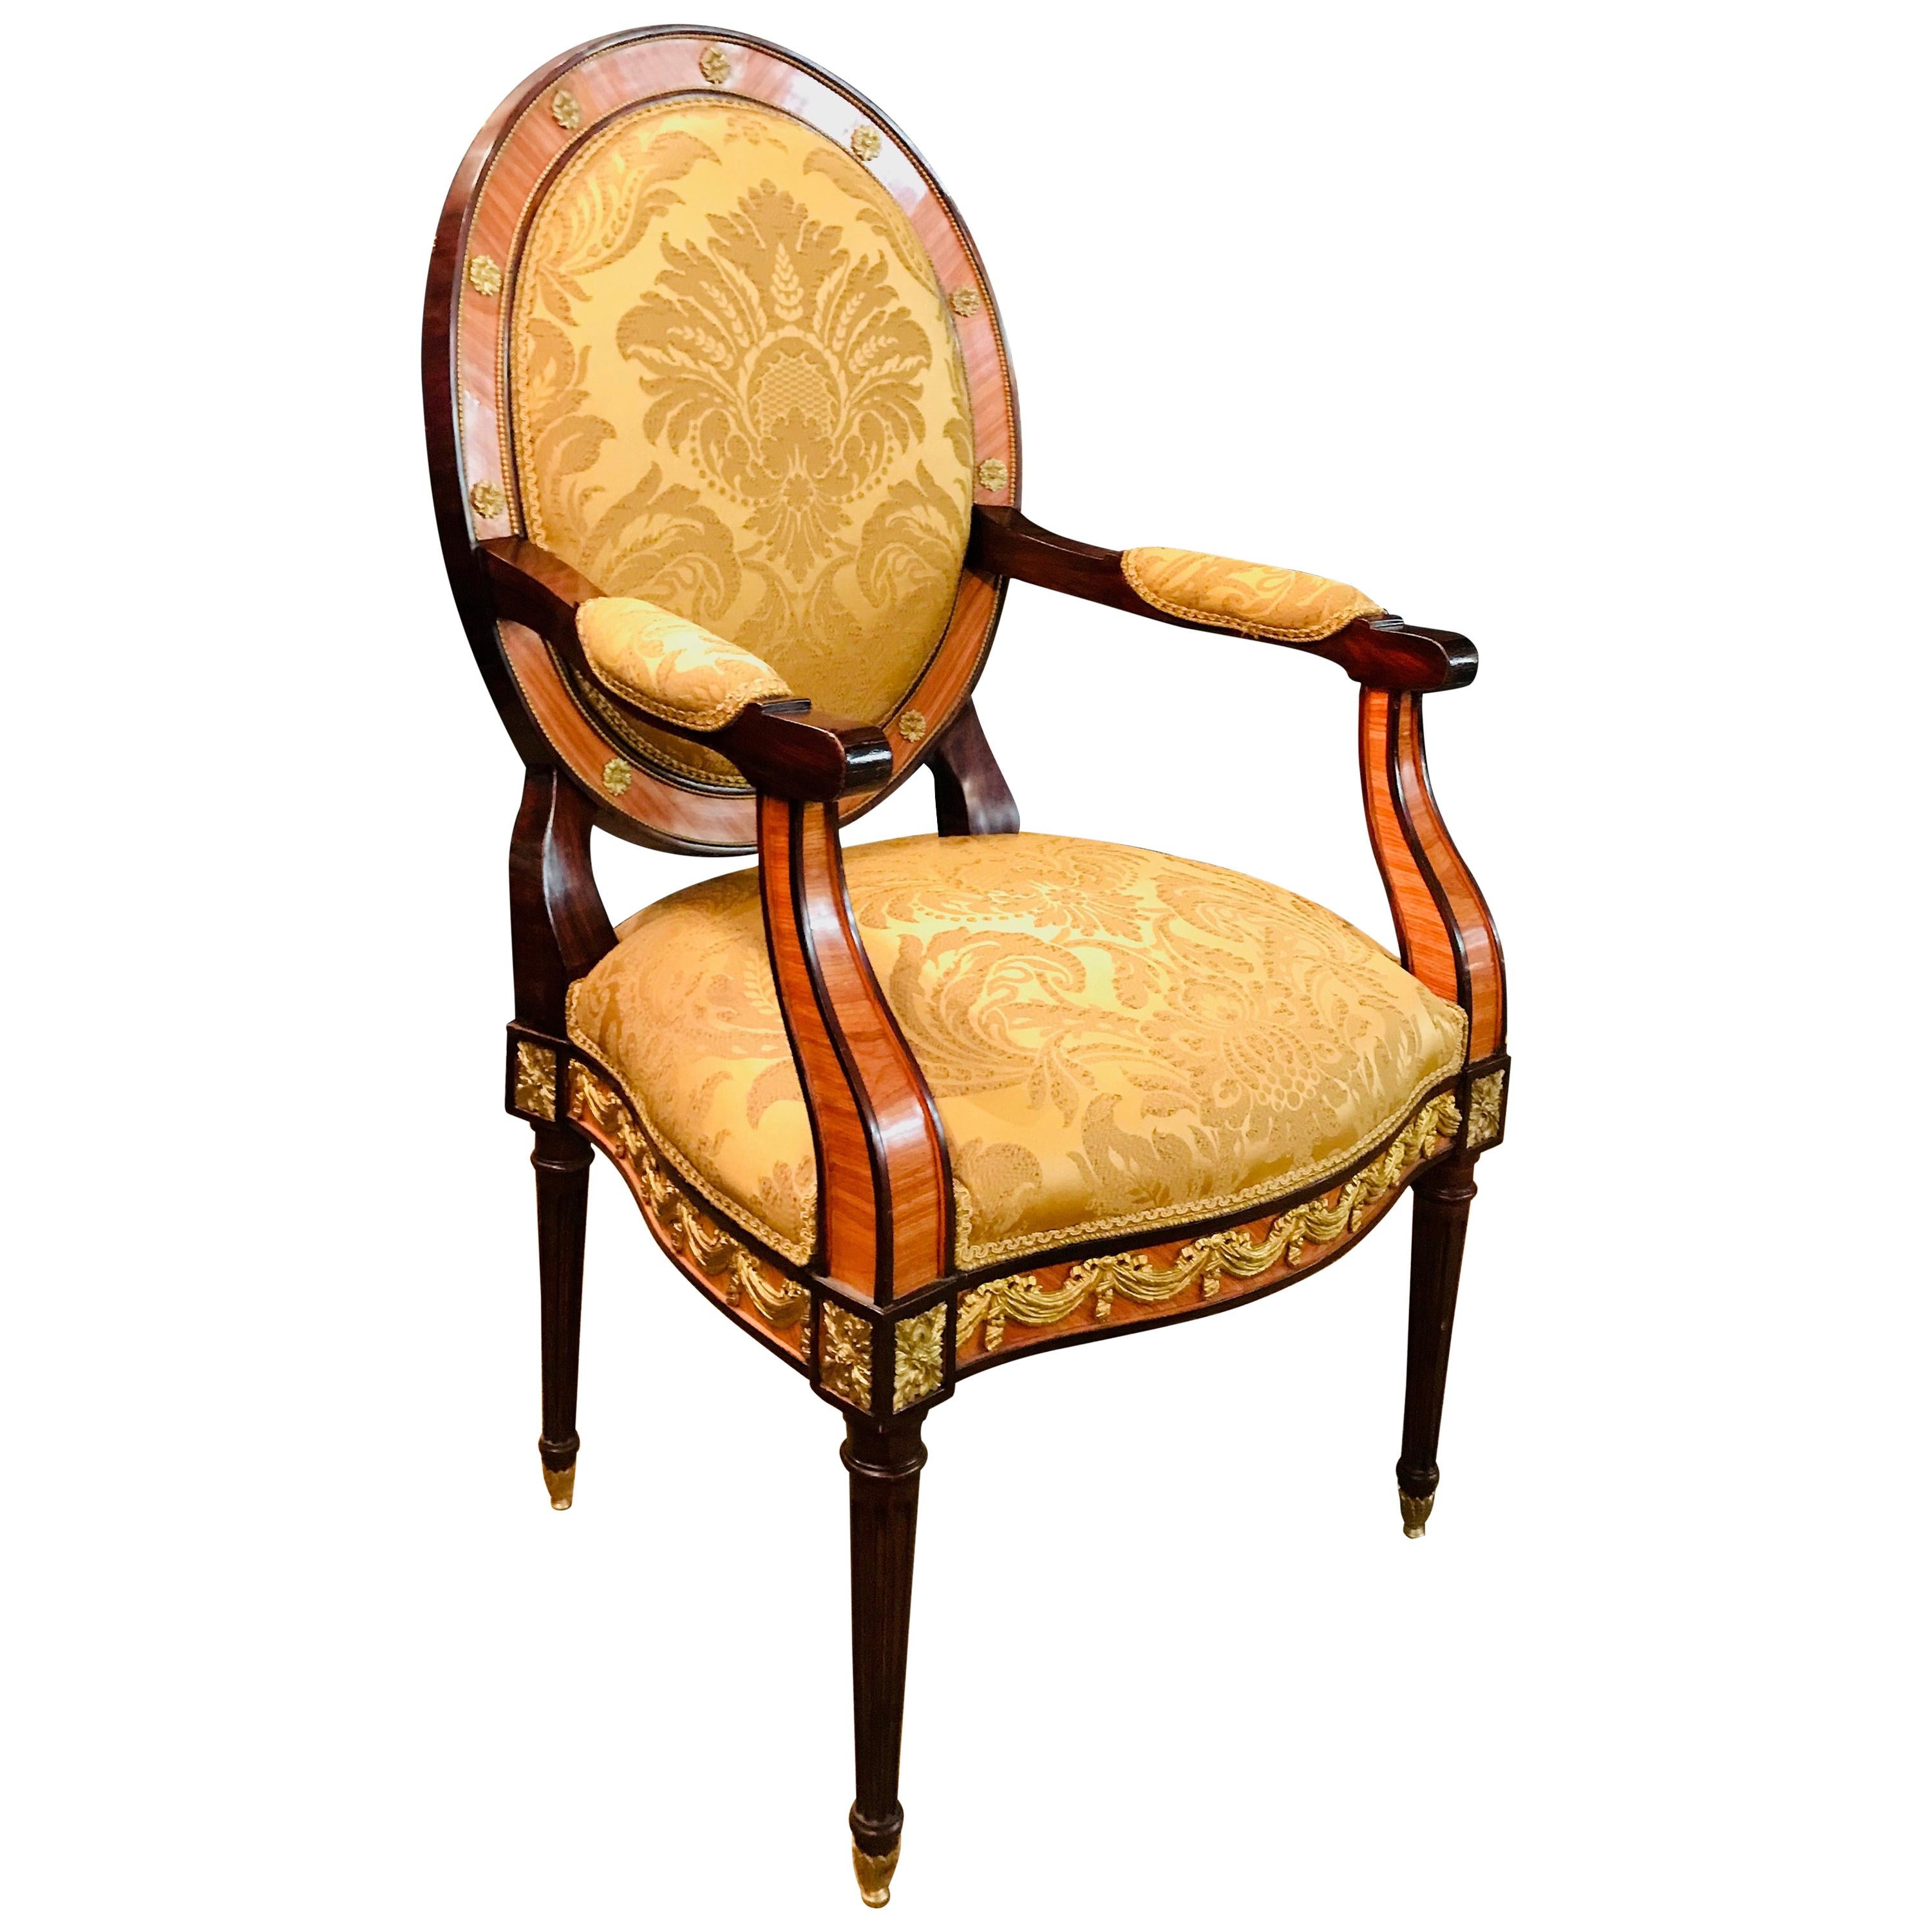 Majestic Armchair in Louis Seize Style with Bronze